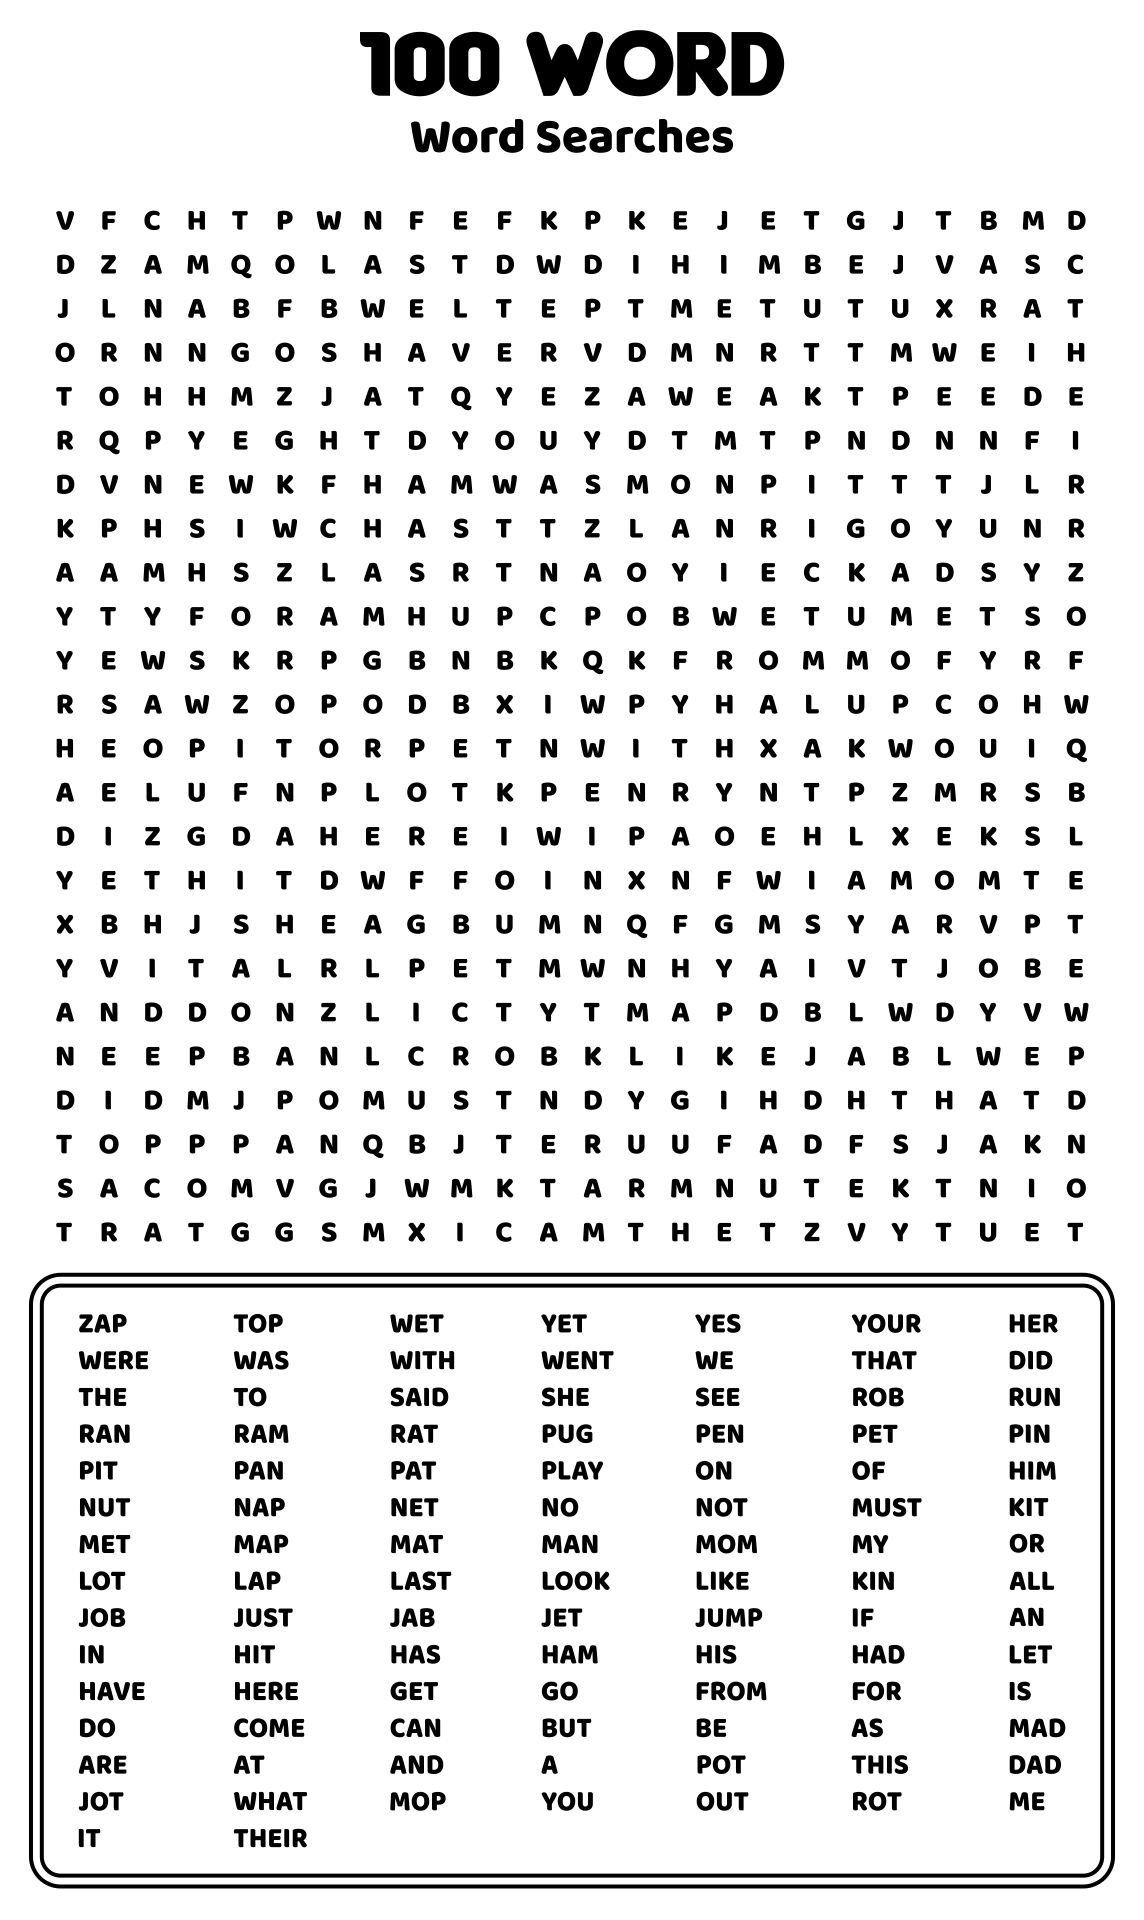 100 Word Printable Word Searches For Adults_28146